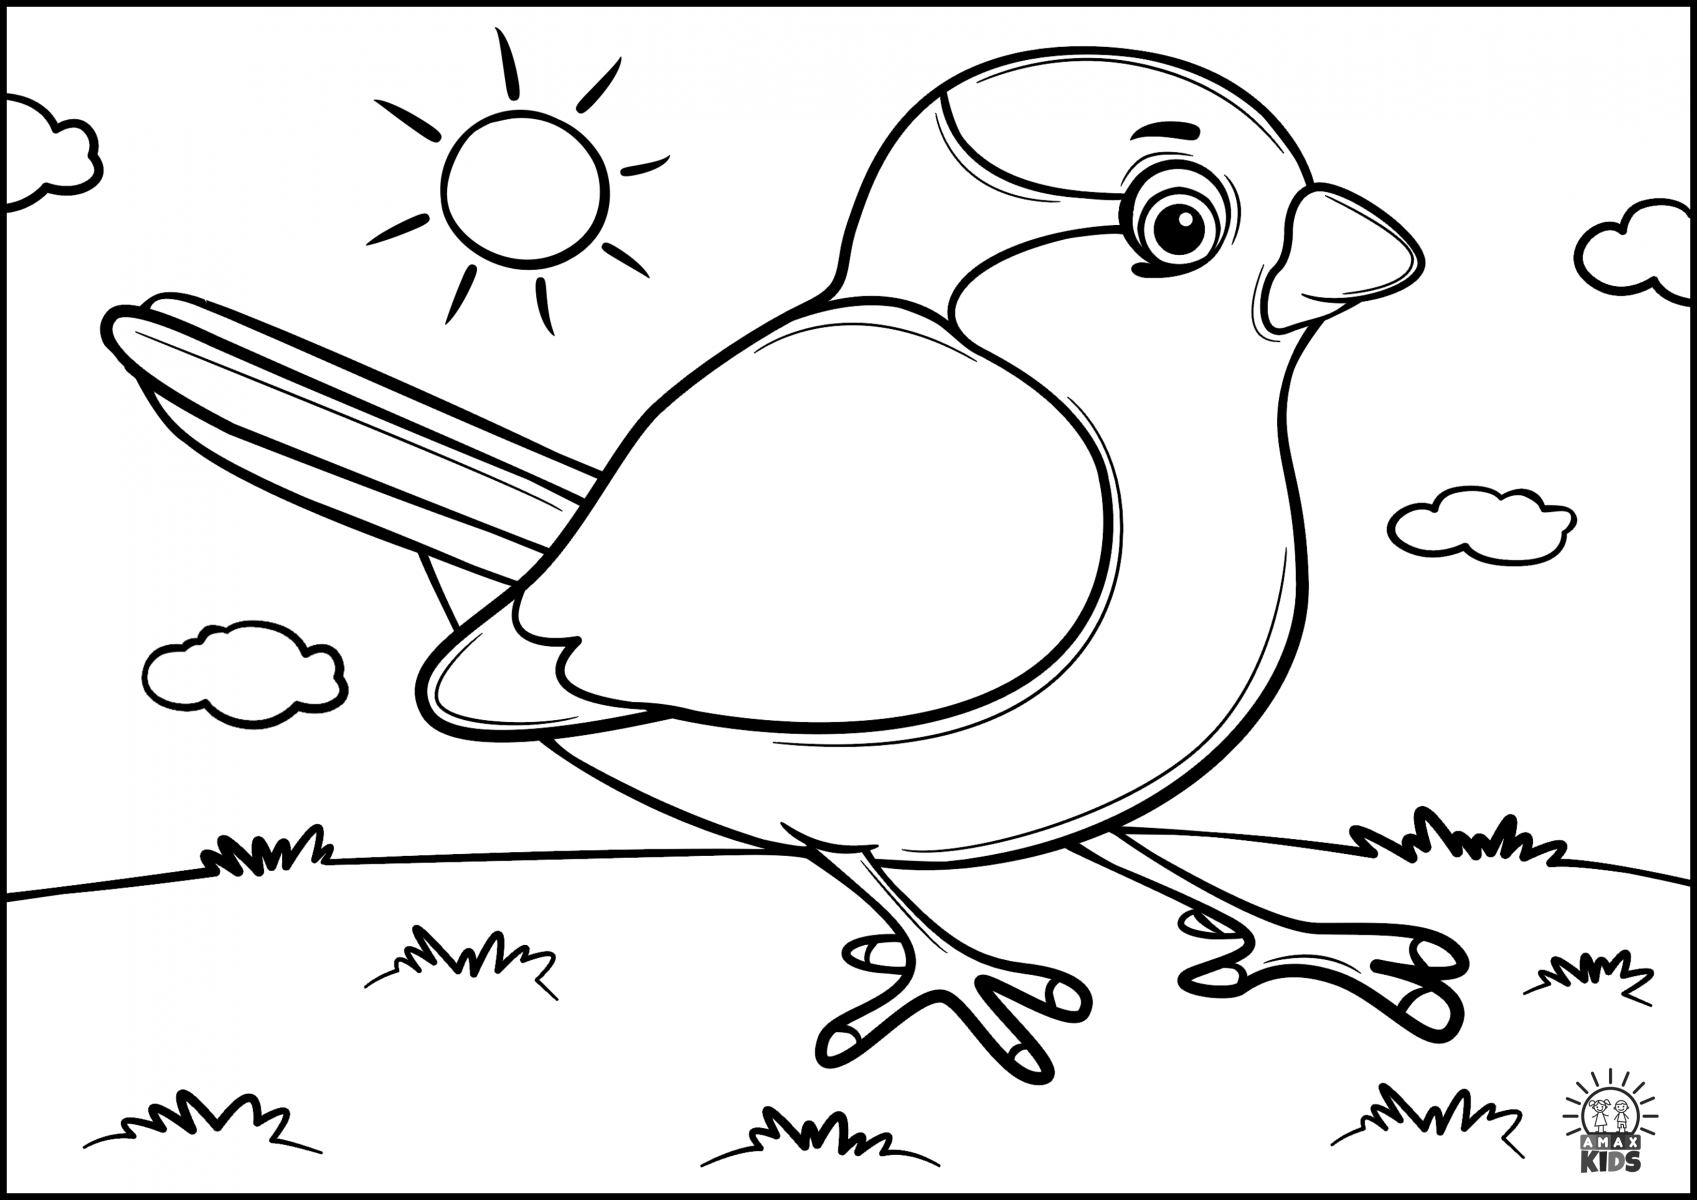 Download Coloring pages for kids with birds | Amax Kids